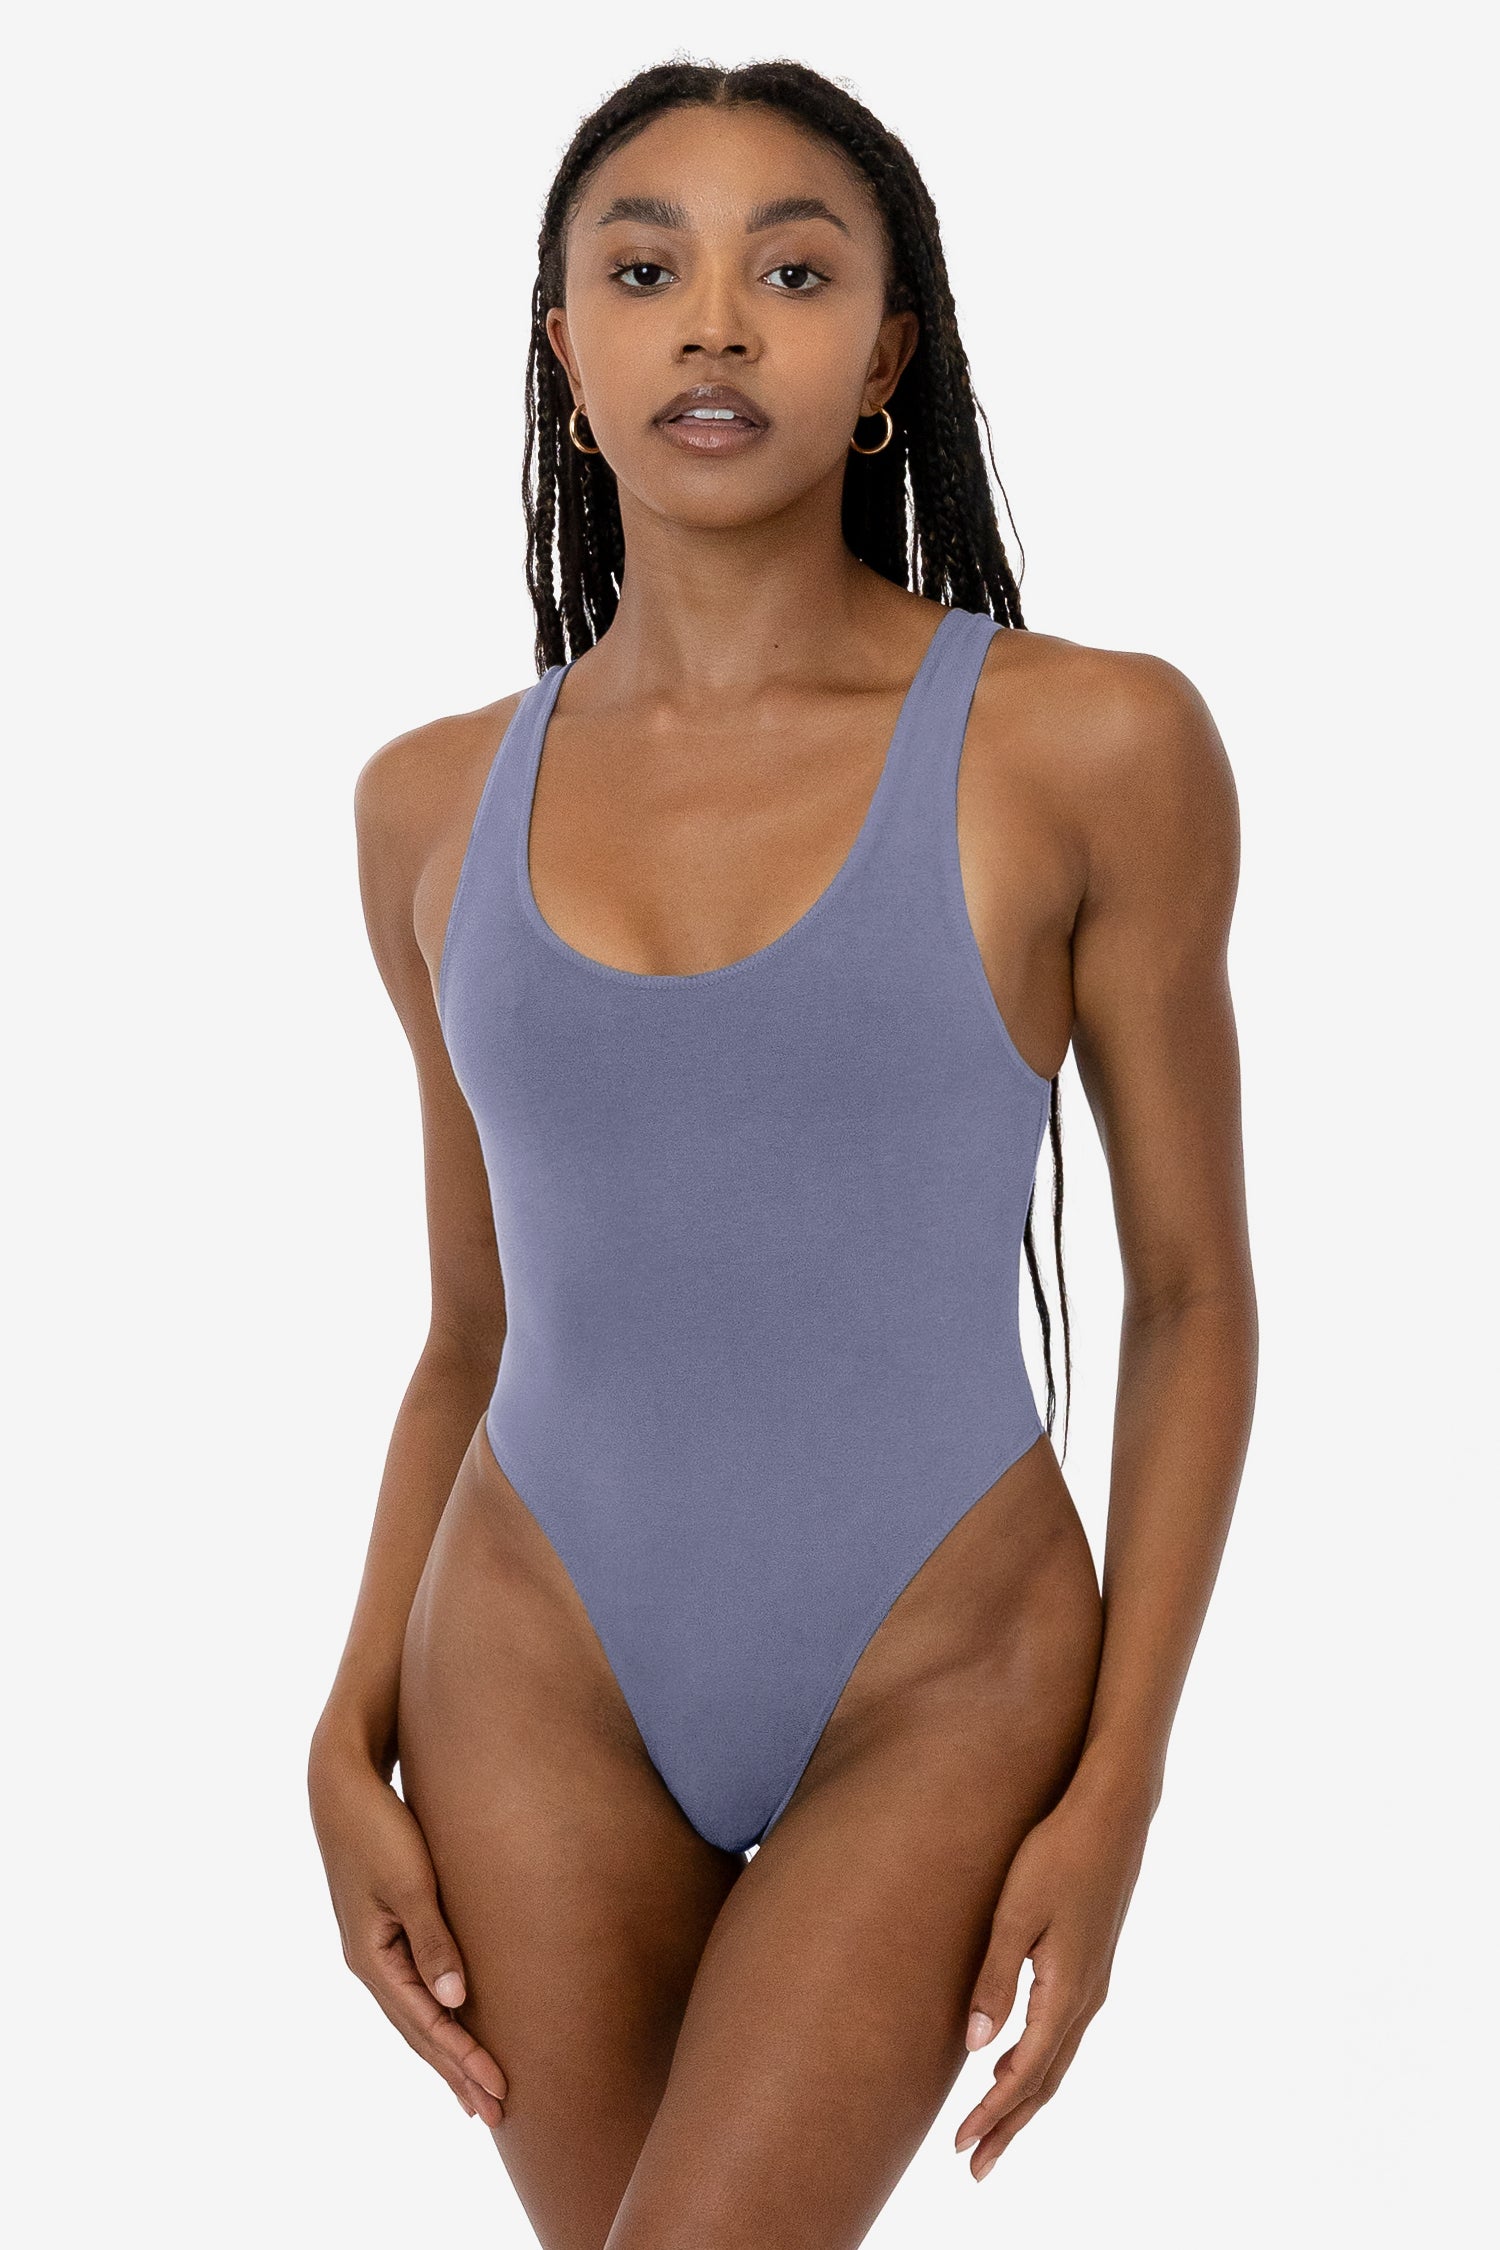 American Apparel 'Thong Bodysuit' Advert Banned For Showing Young